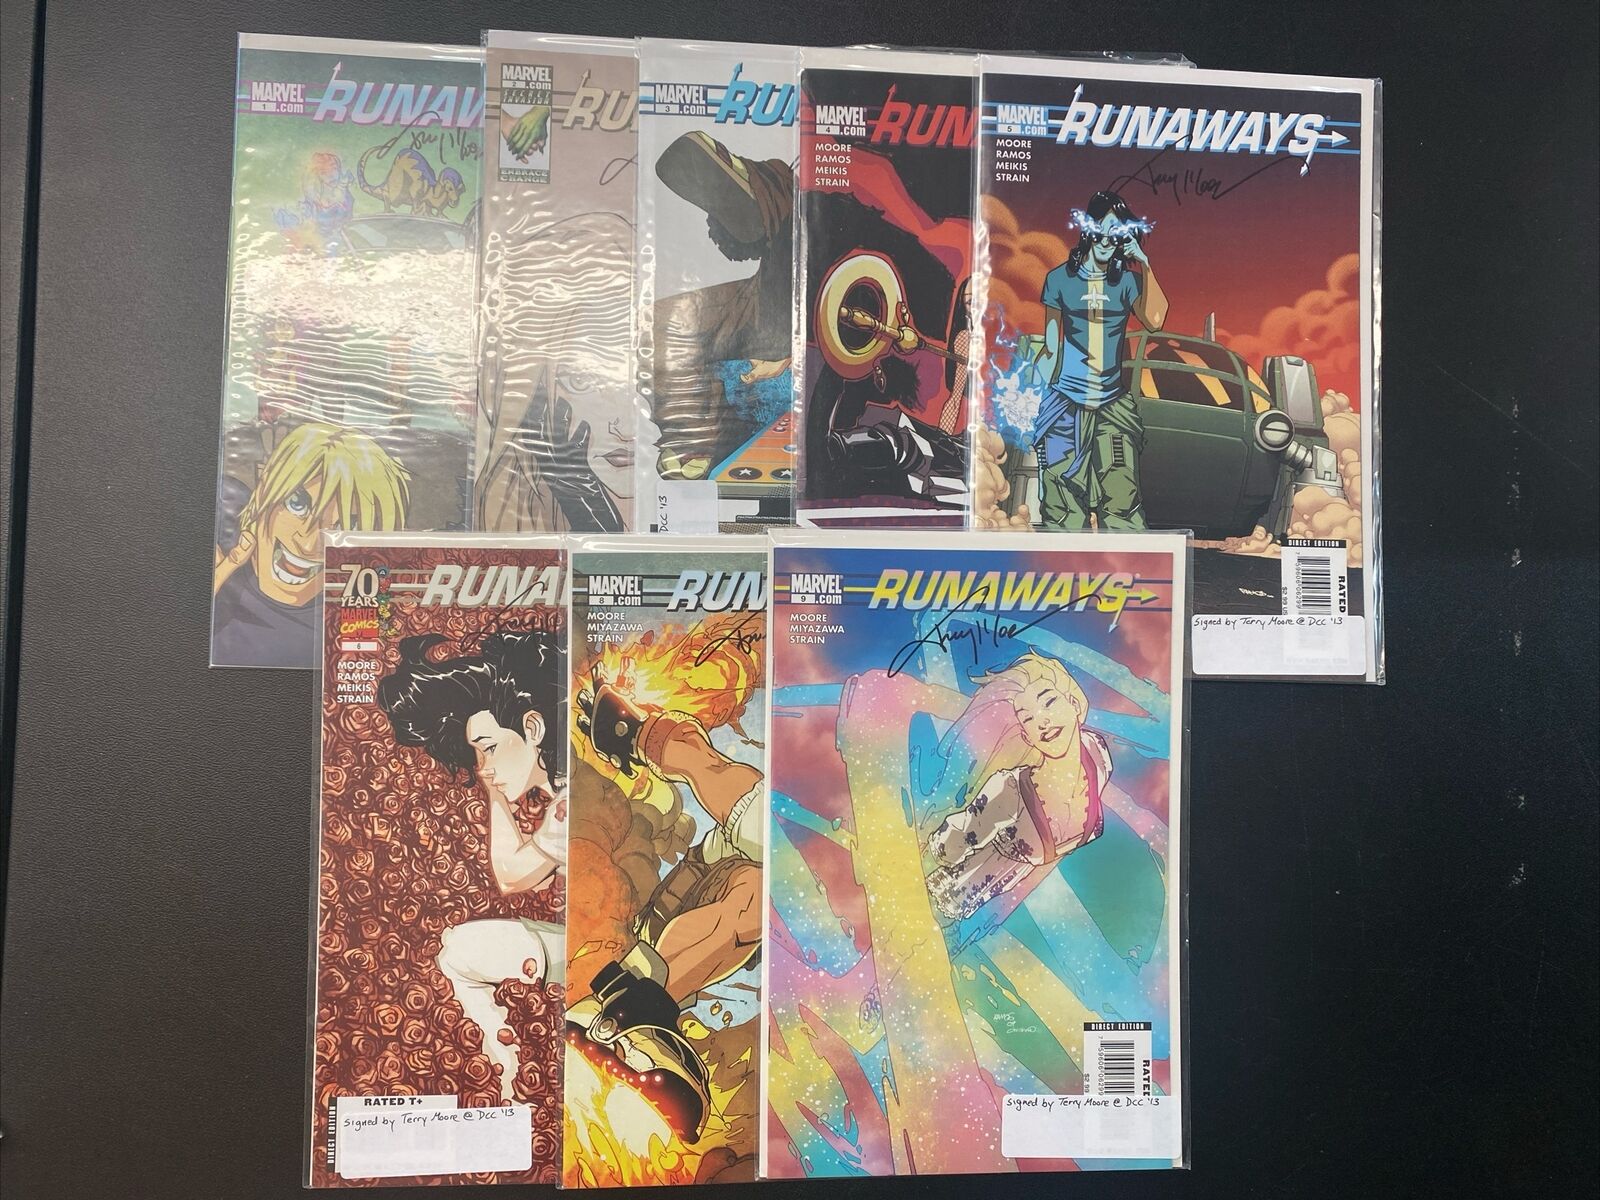 Runaways (2008) #1-9 (missing #7) ALL ISSUES SIGNED BY TERRY MOORE NM